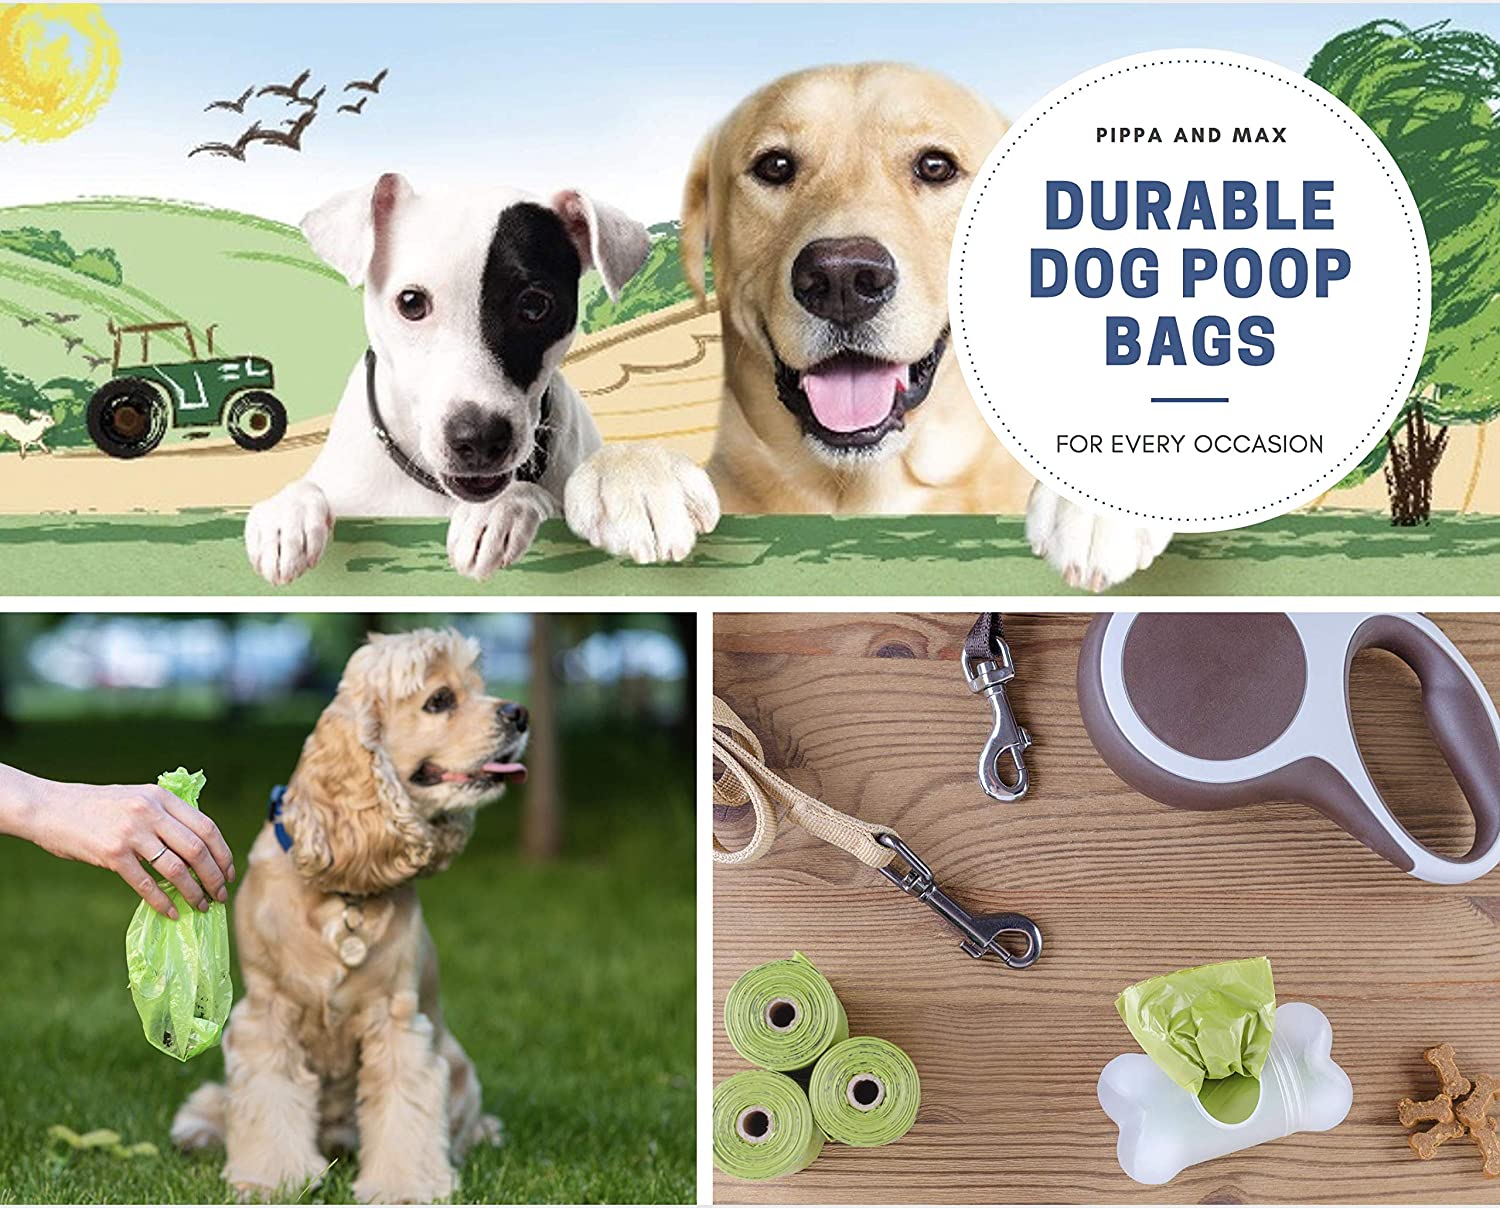 Thick & Durable Dog Poop Bags by Pippa & Max (750) - Heavy-Duty Pet Waste Bags for Dog Walking, Leak-Proof & Large Size